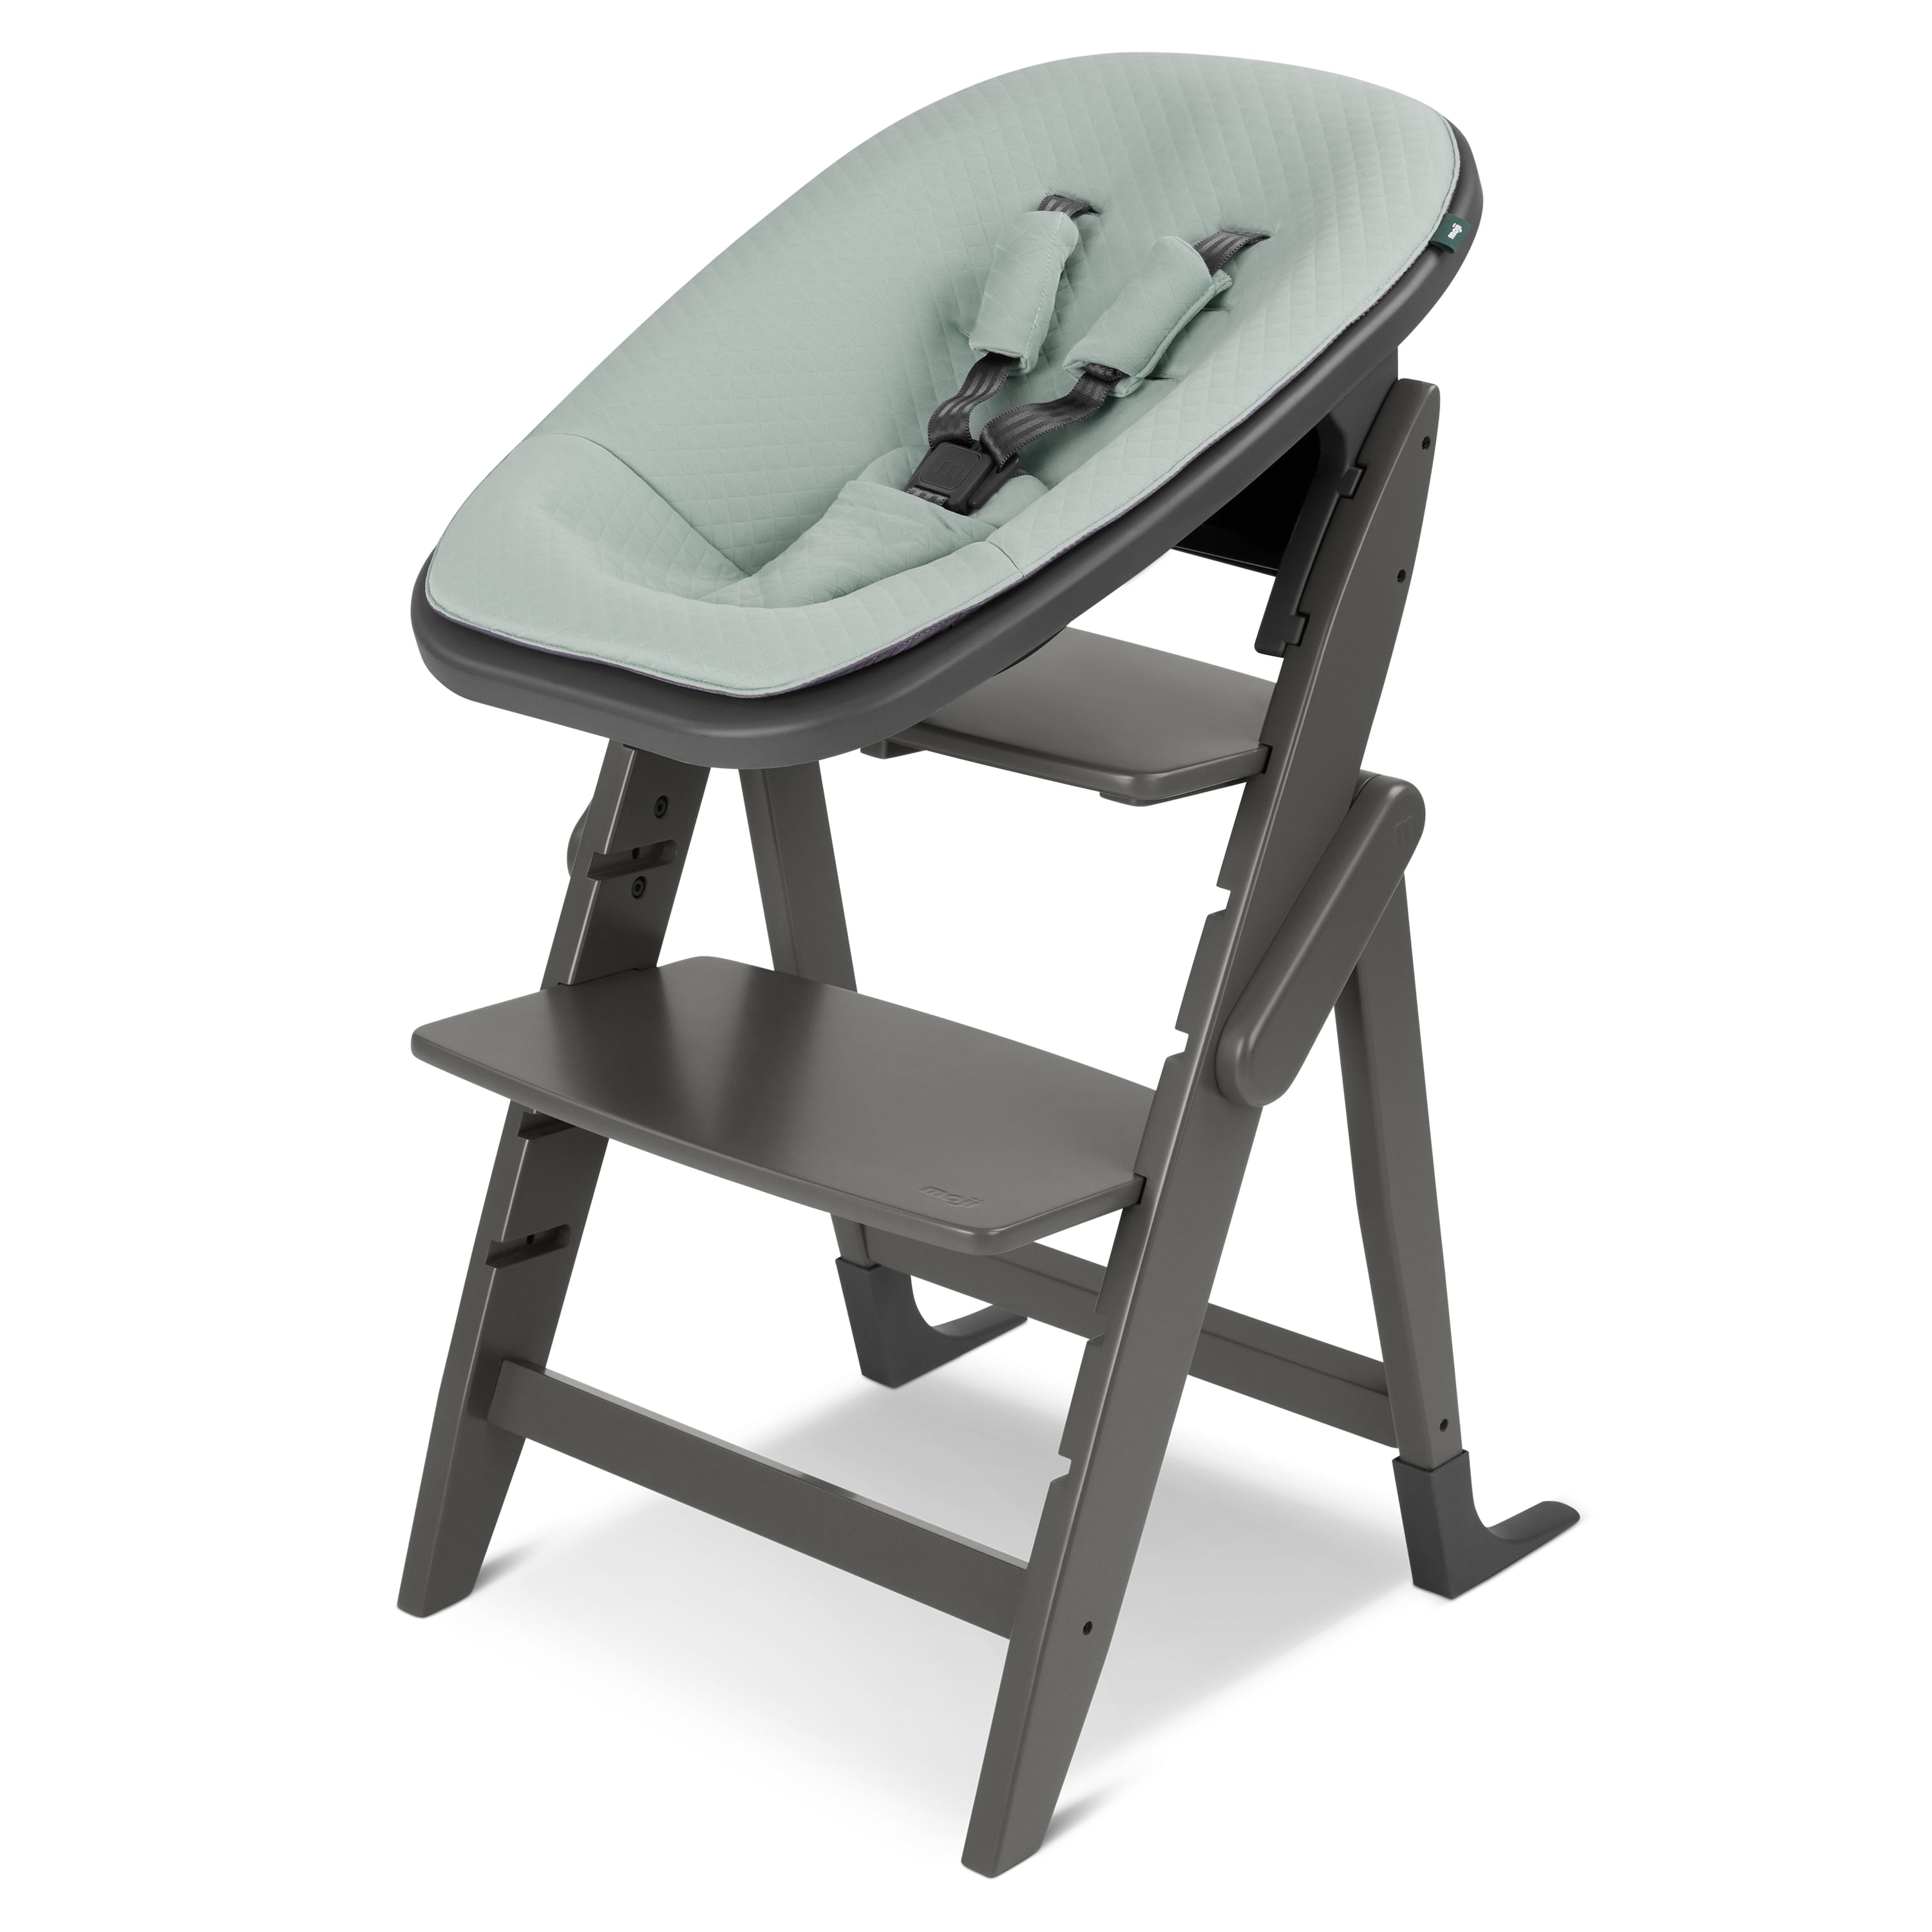 YIPPY | moji | The adjustable and foldable high chair